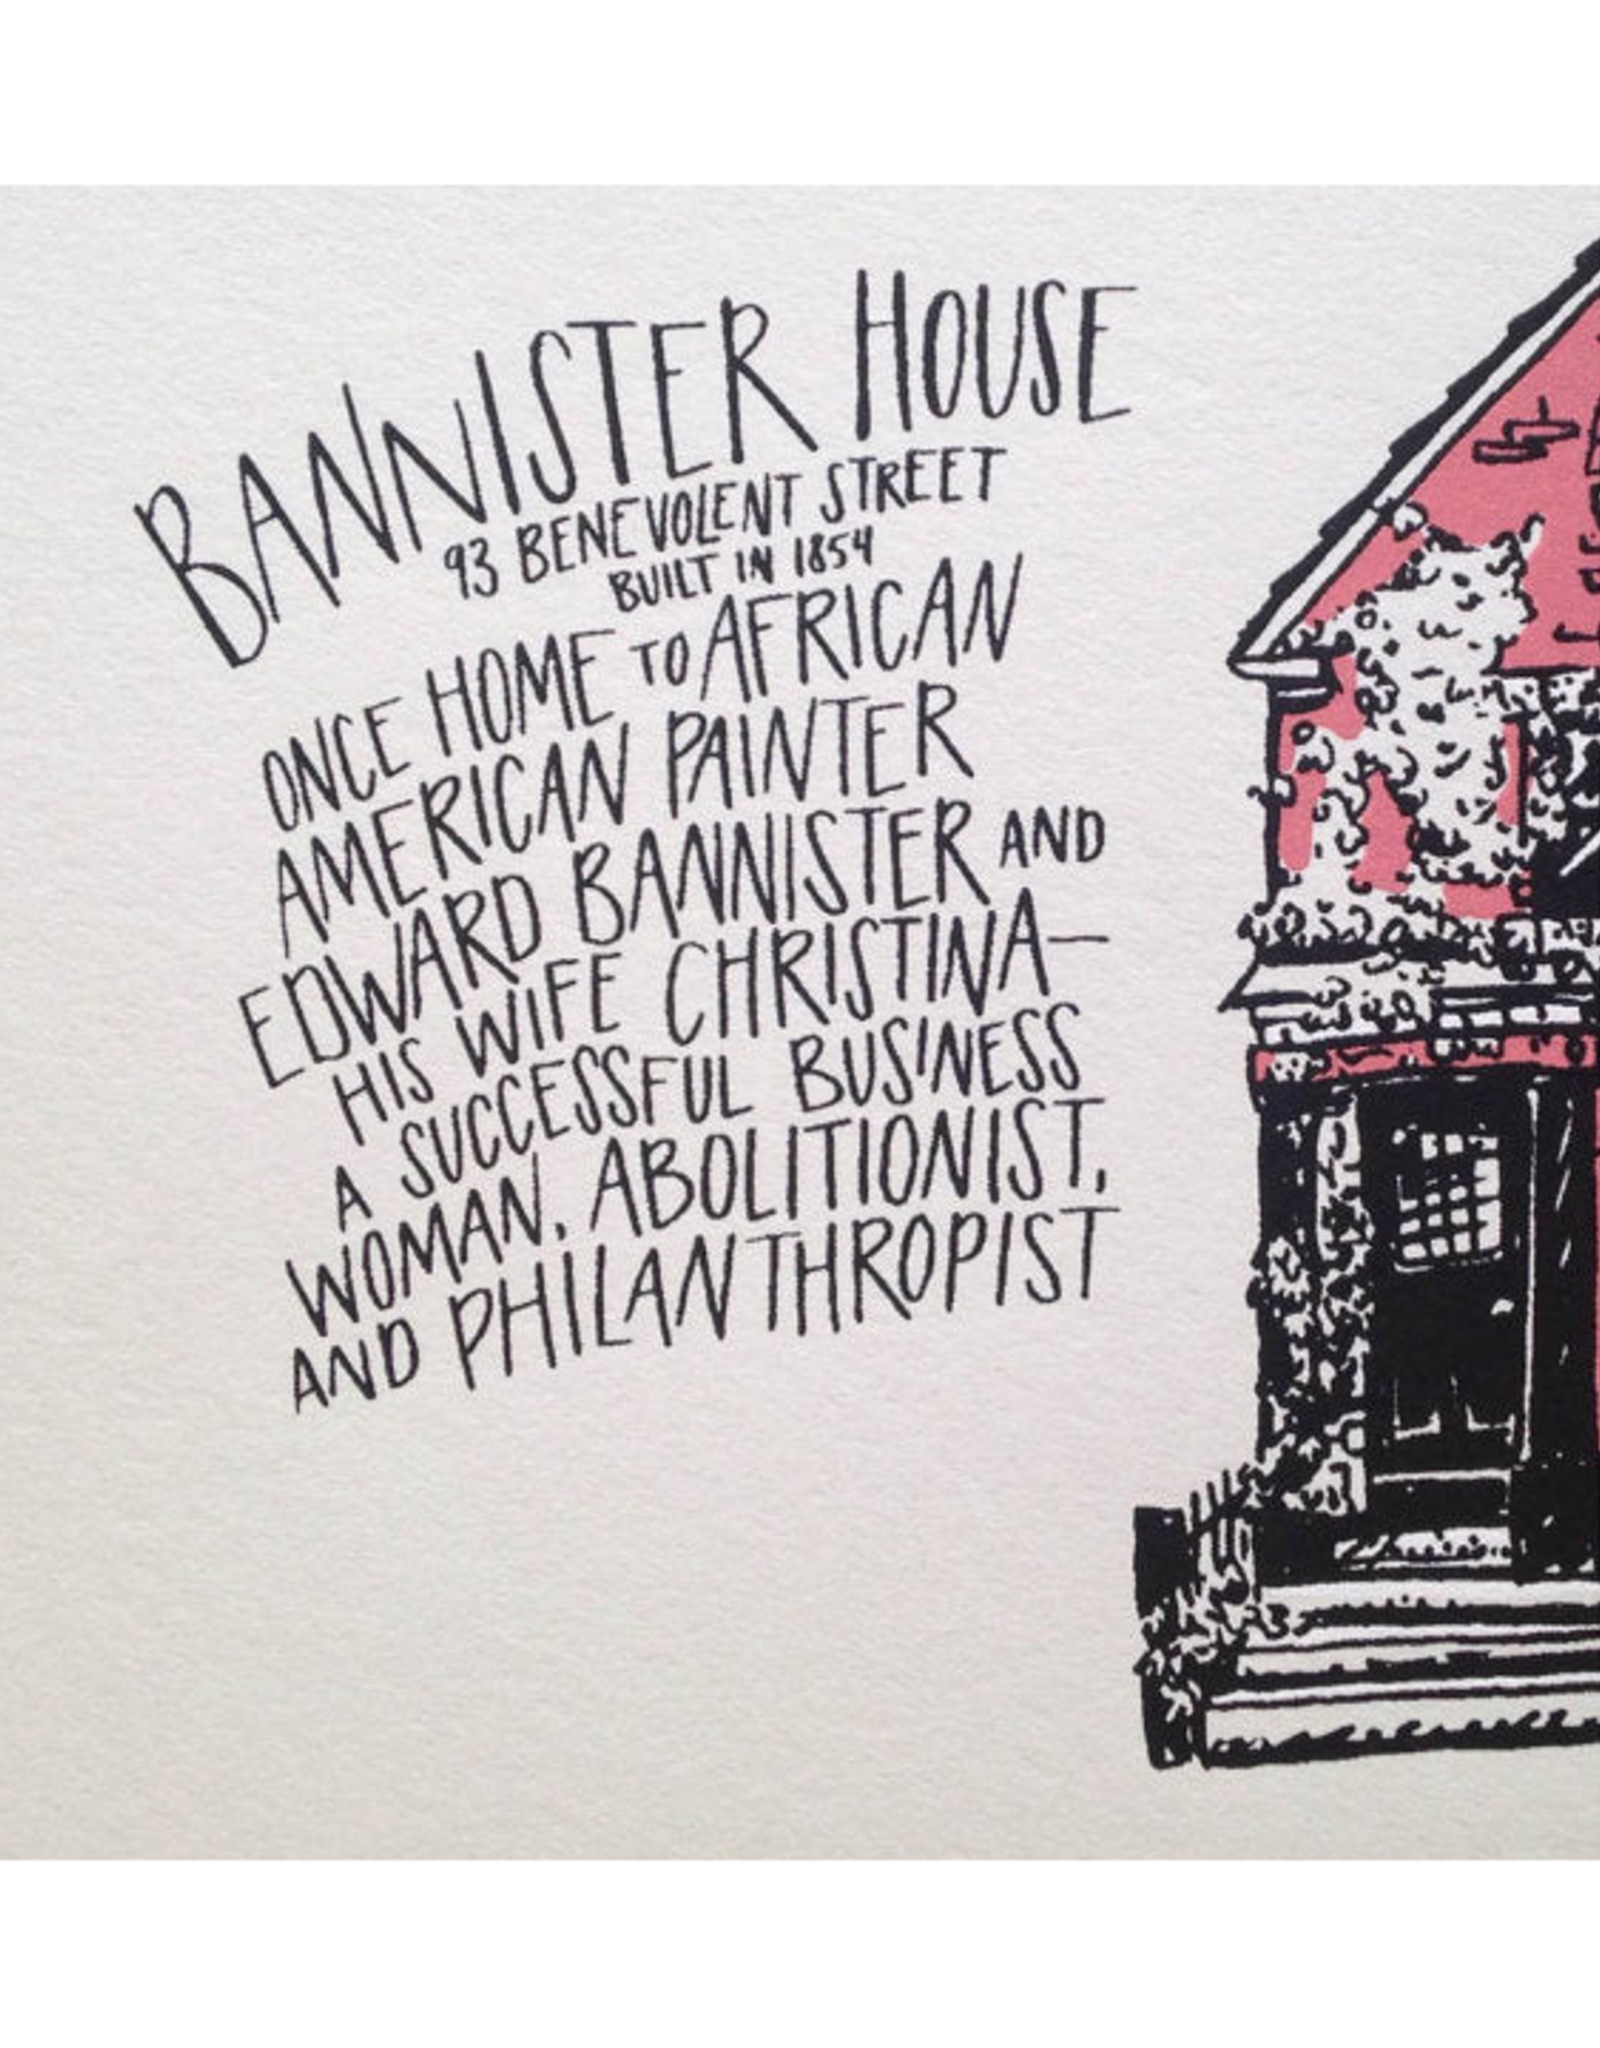 Bannister House Print